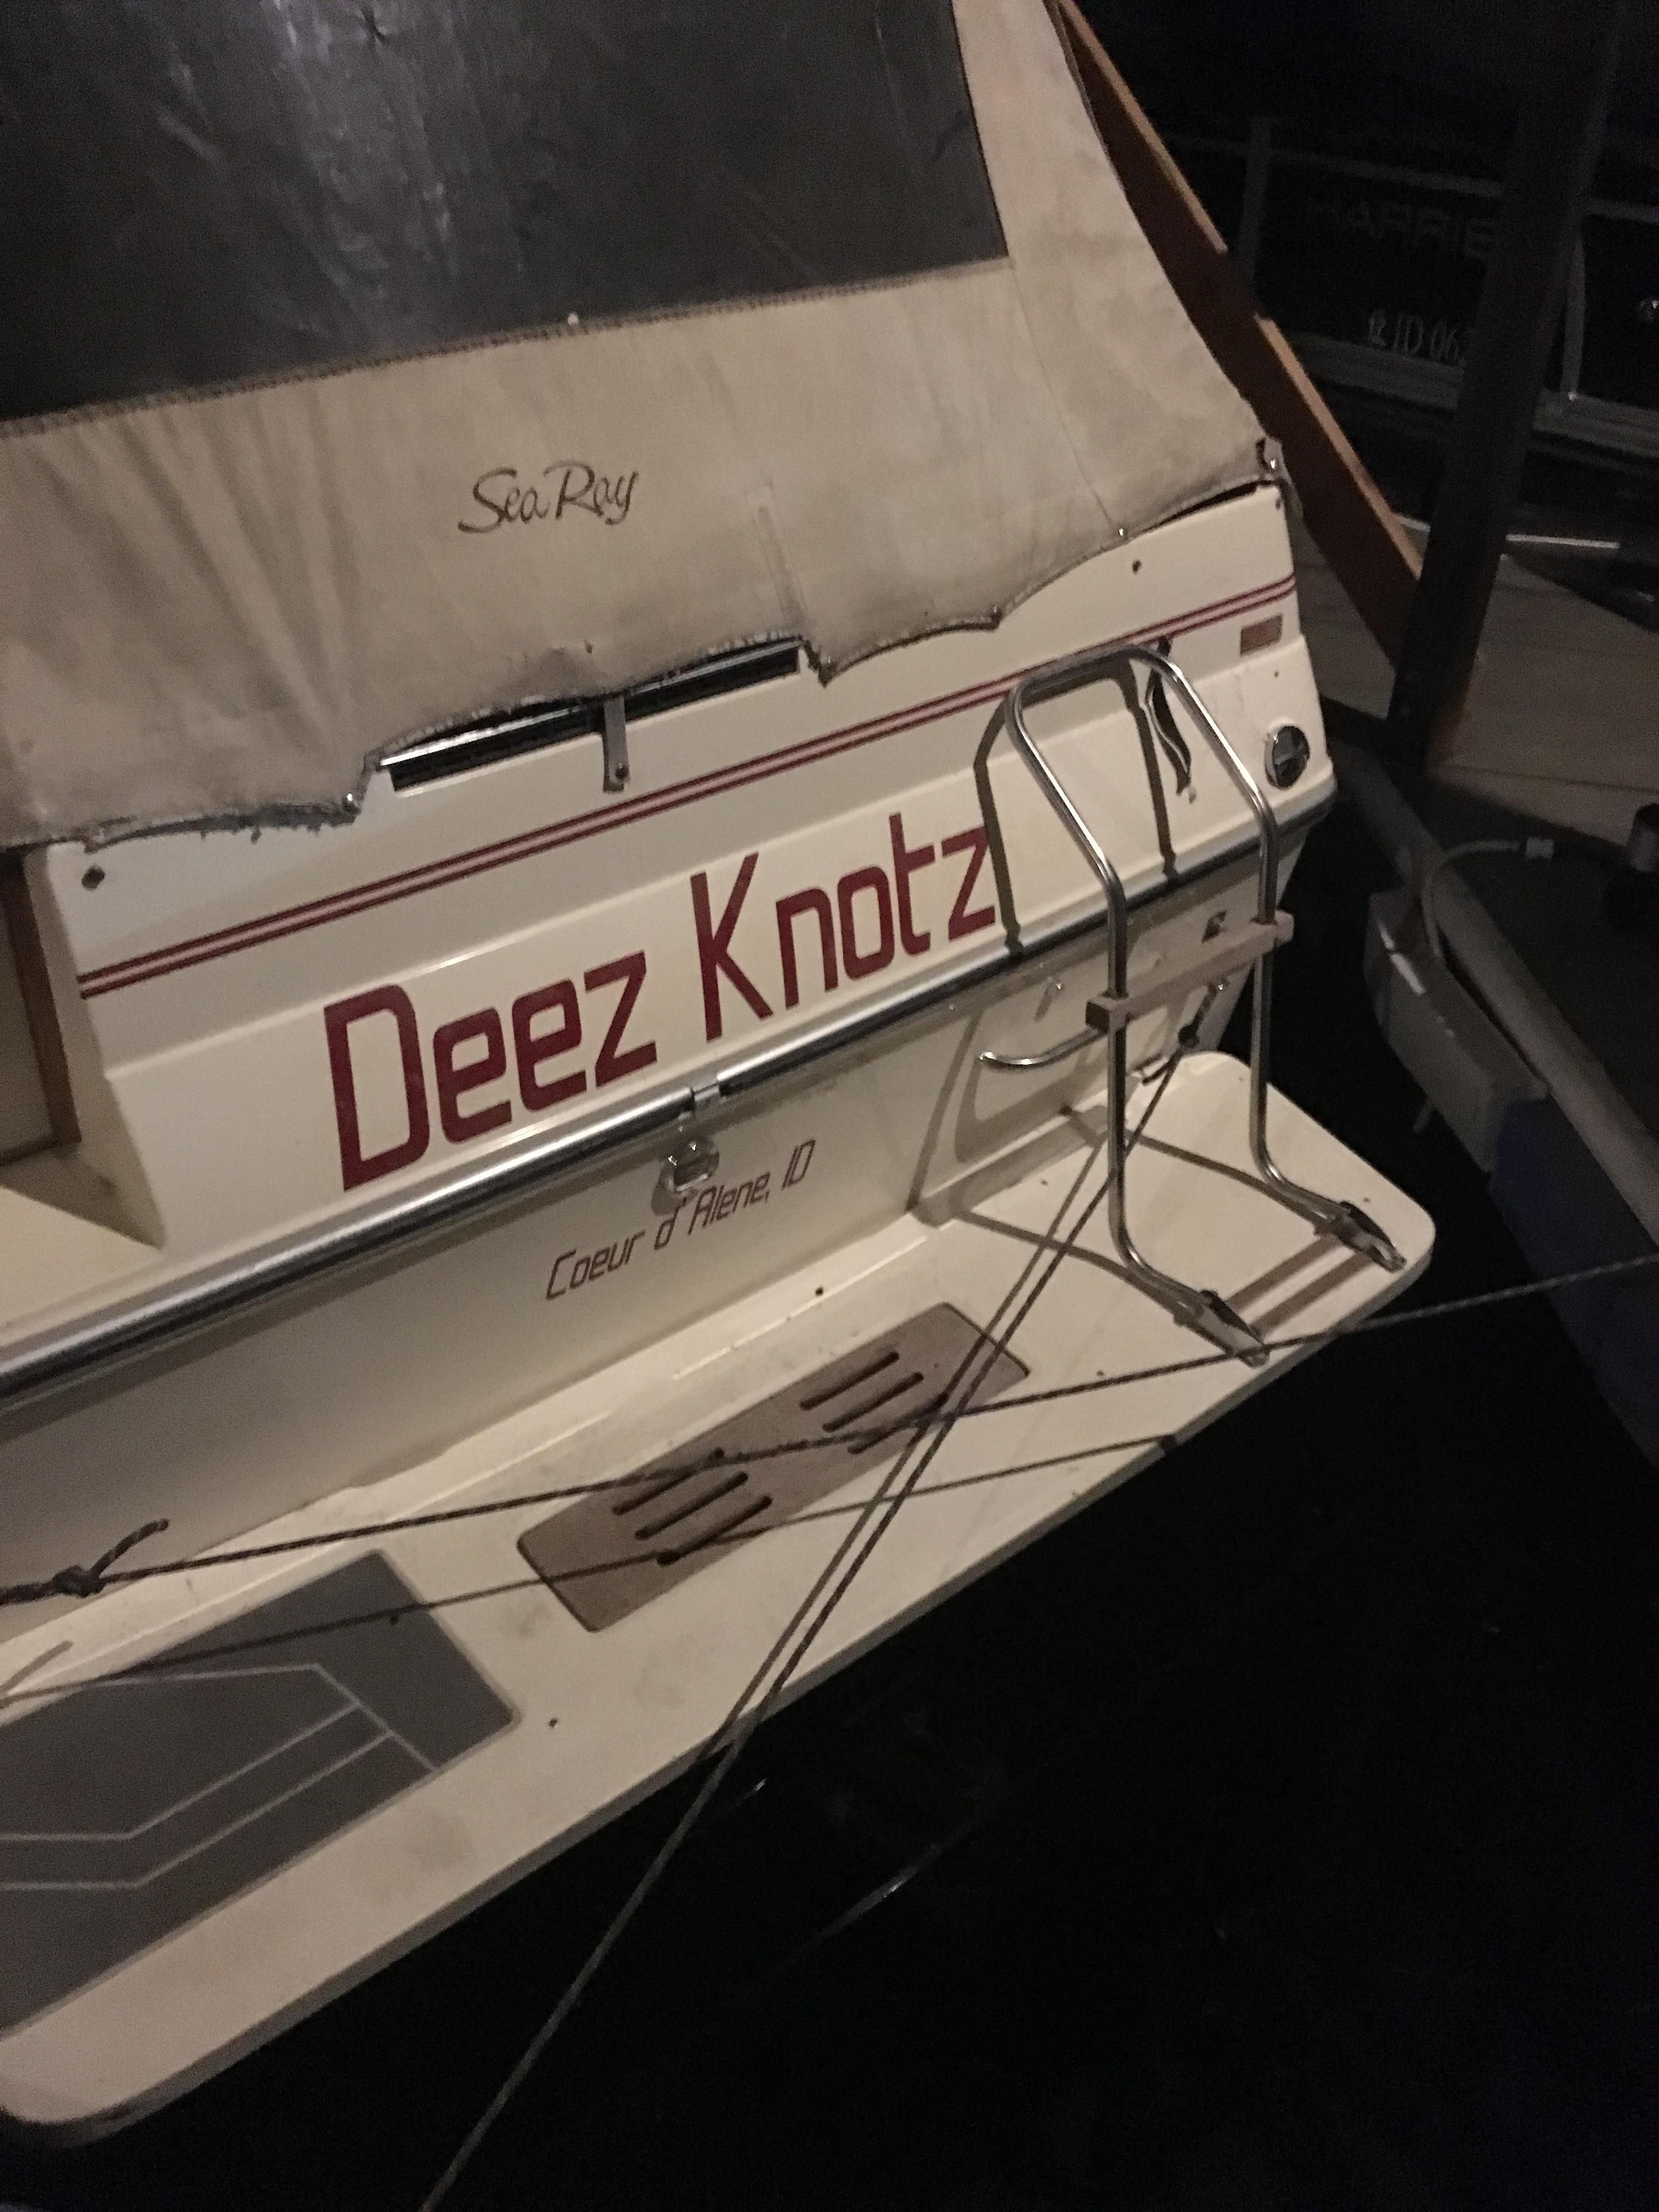 This boats name.